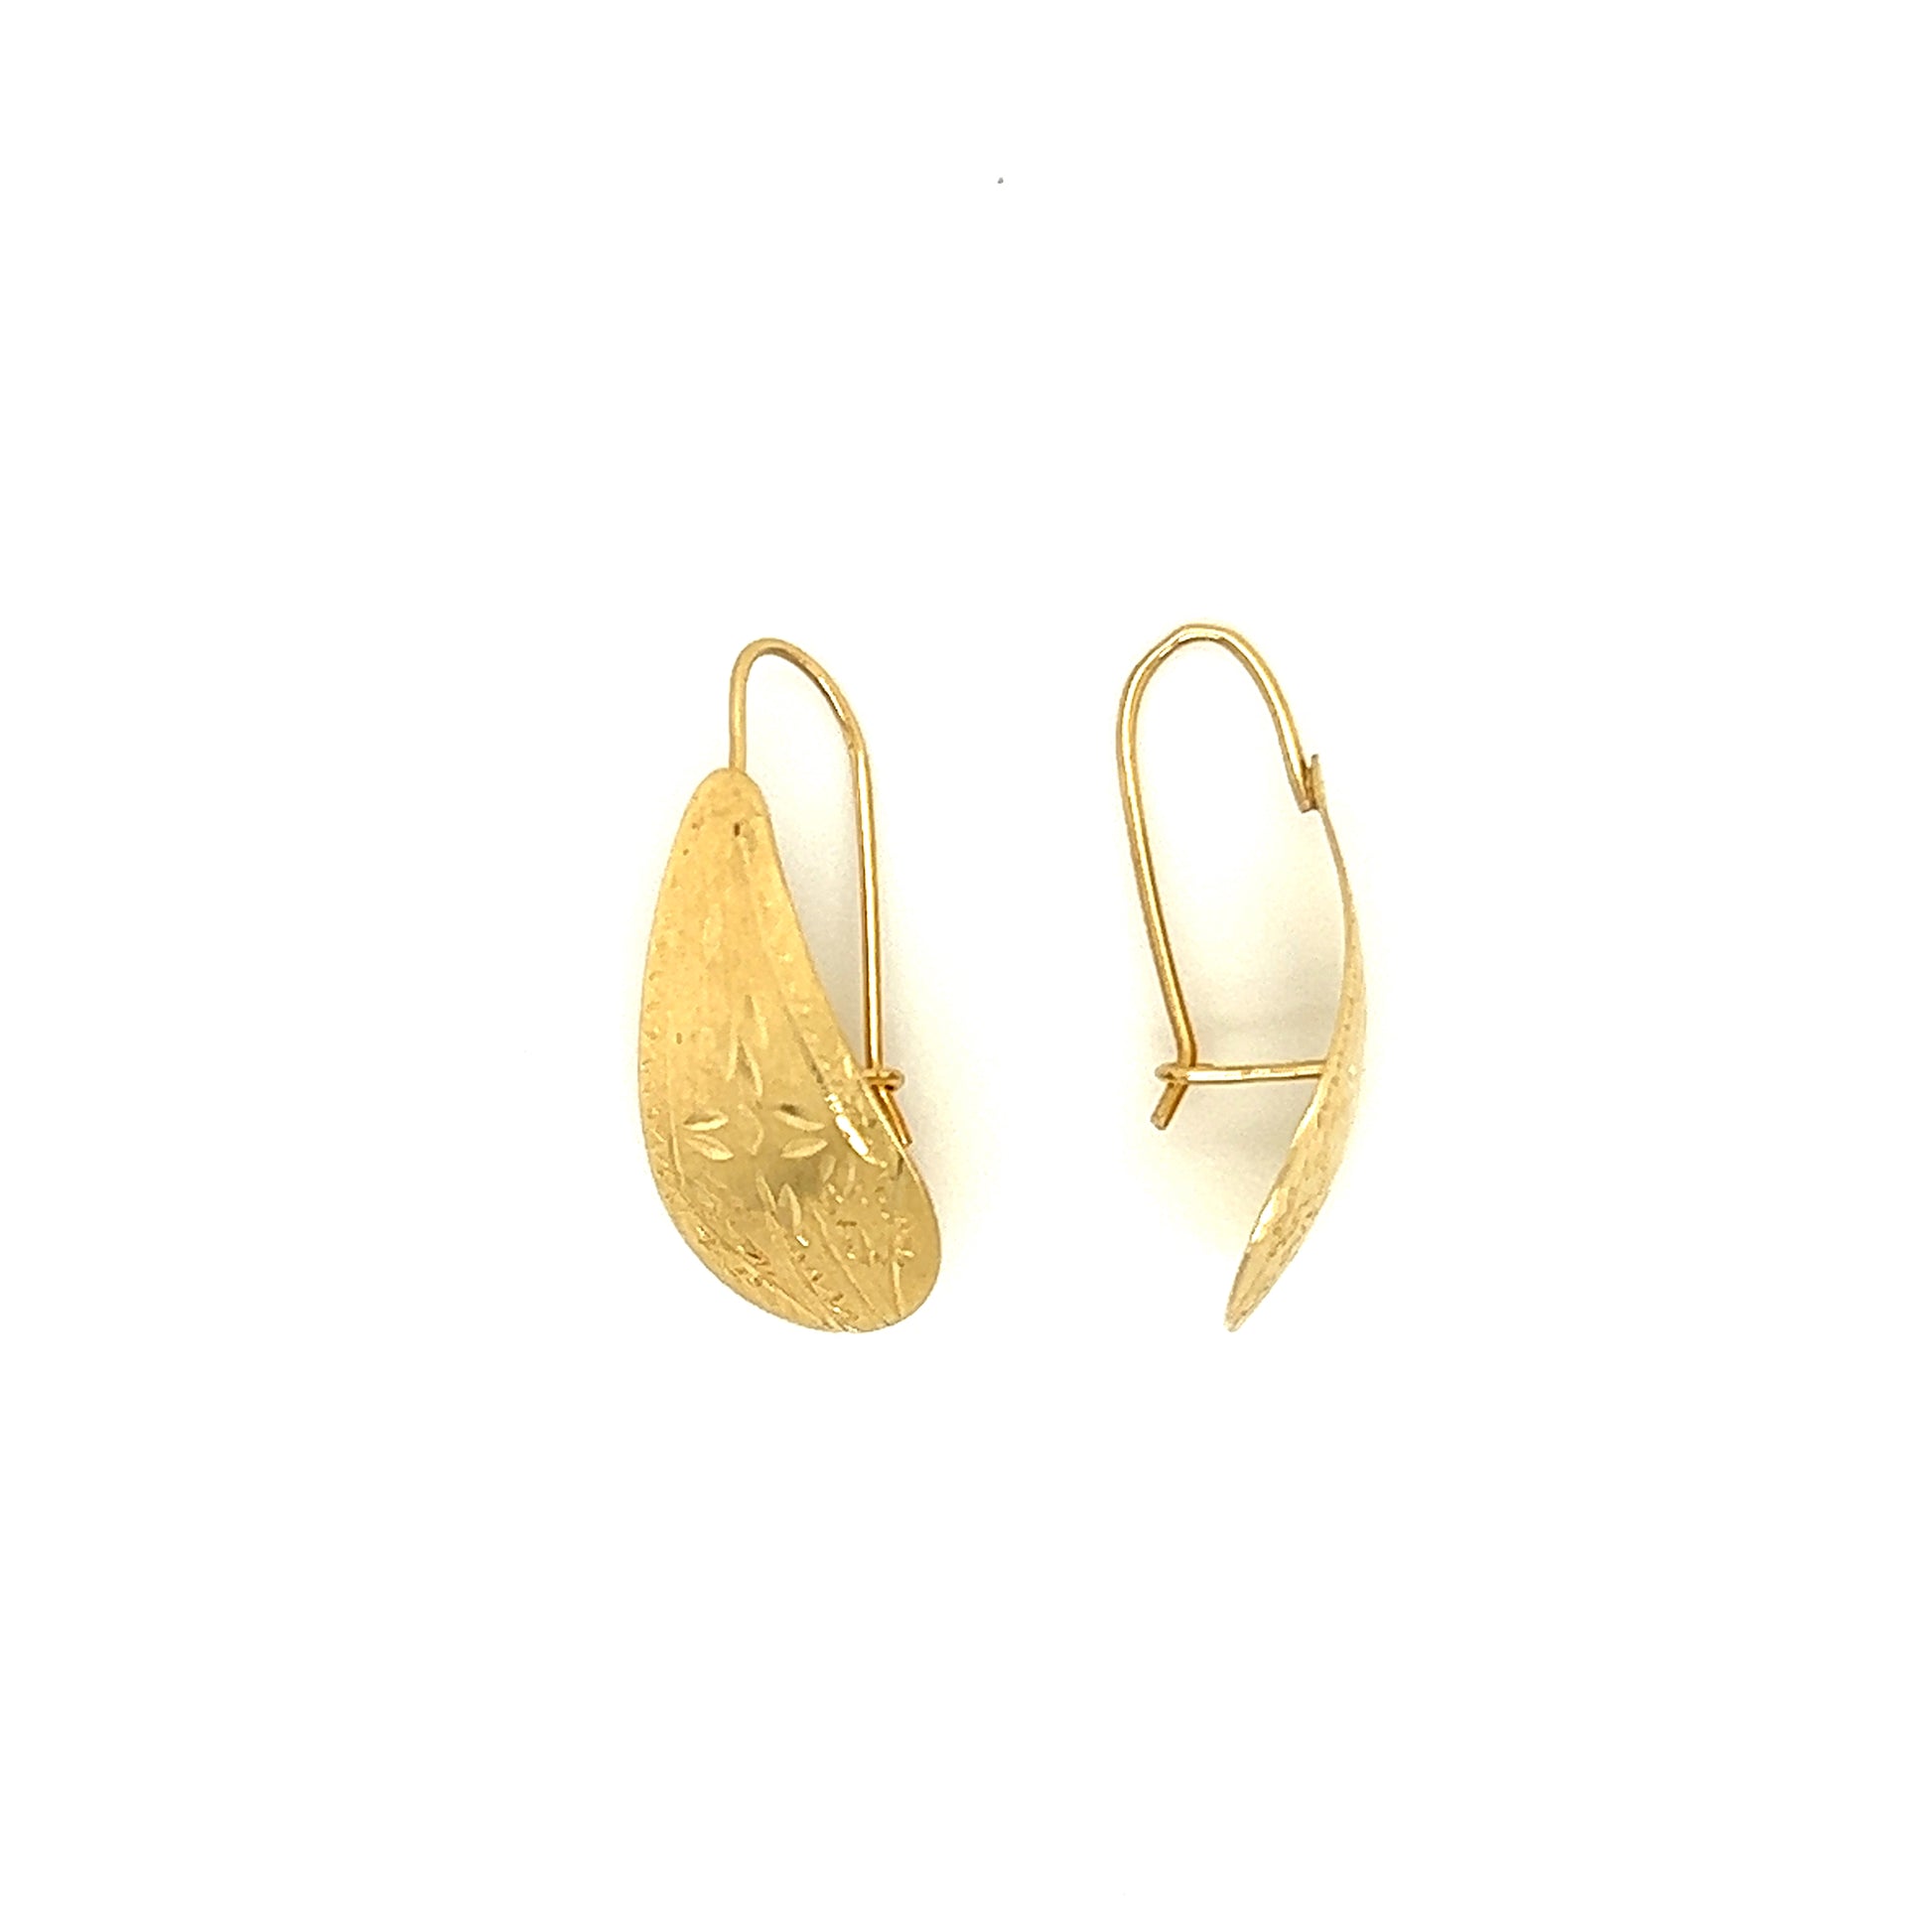 Gold Petal Drop Earrings with Engraving in 14K Yellow Gold Right Profile